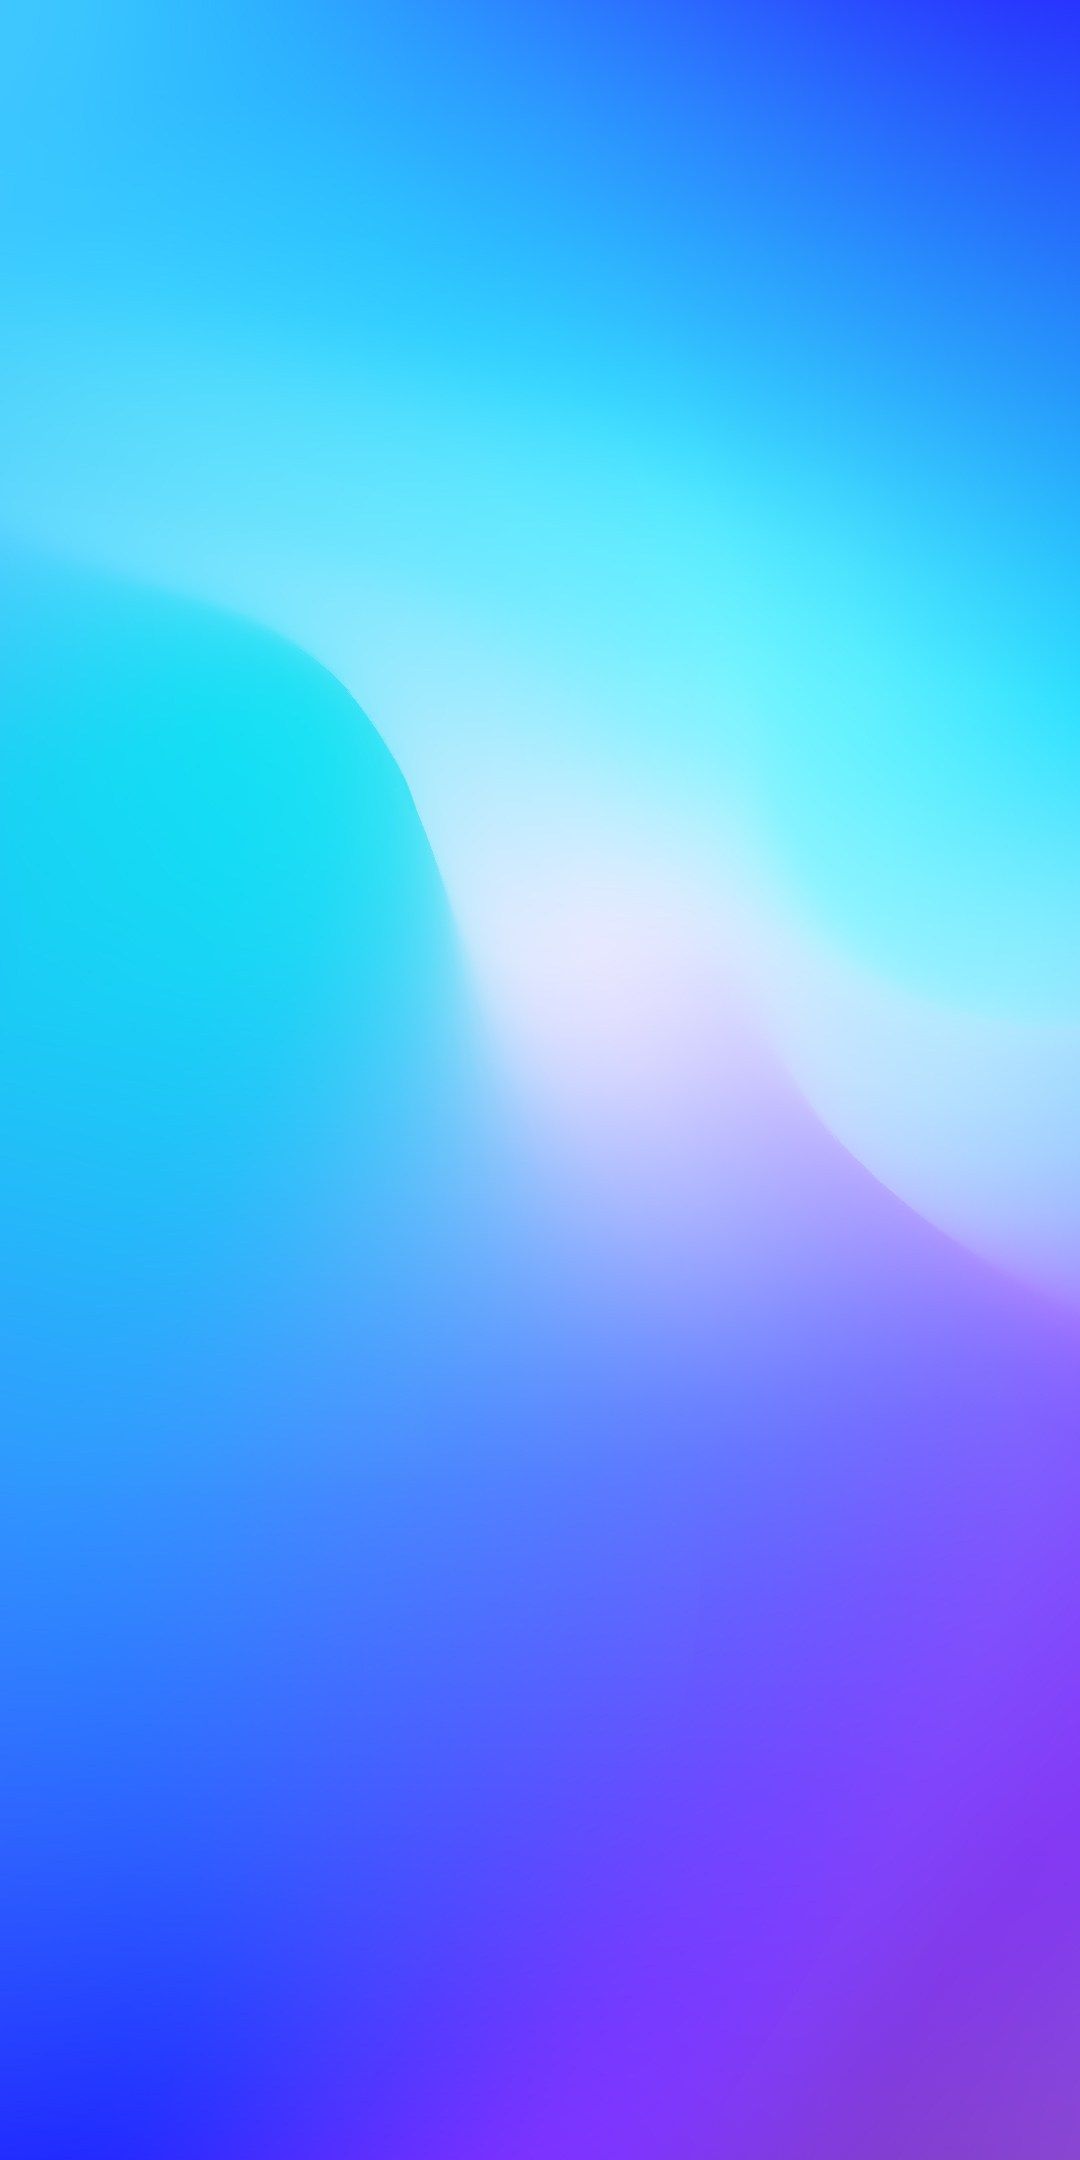 Android m wallpaper droidviews